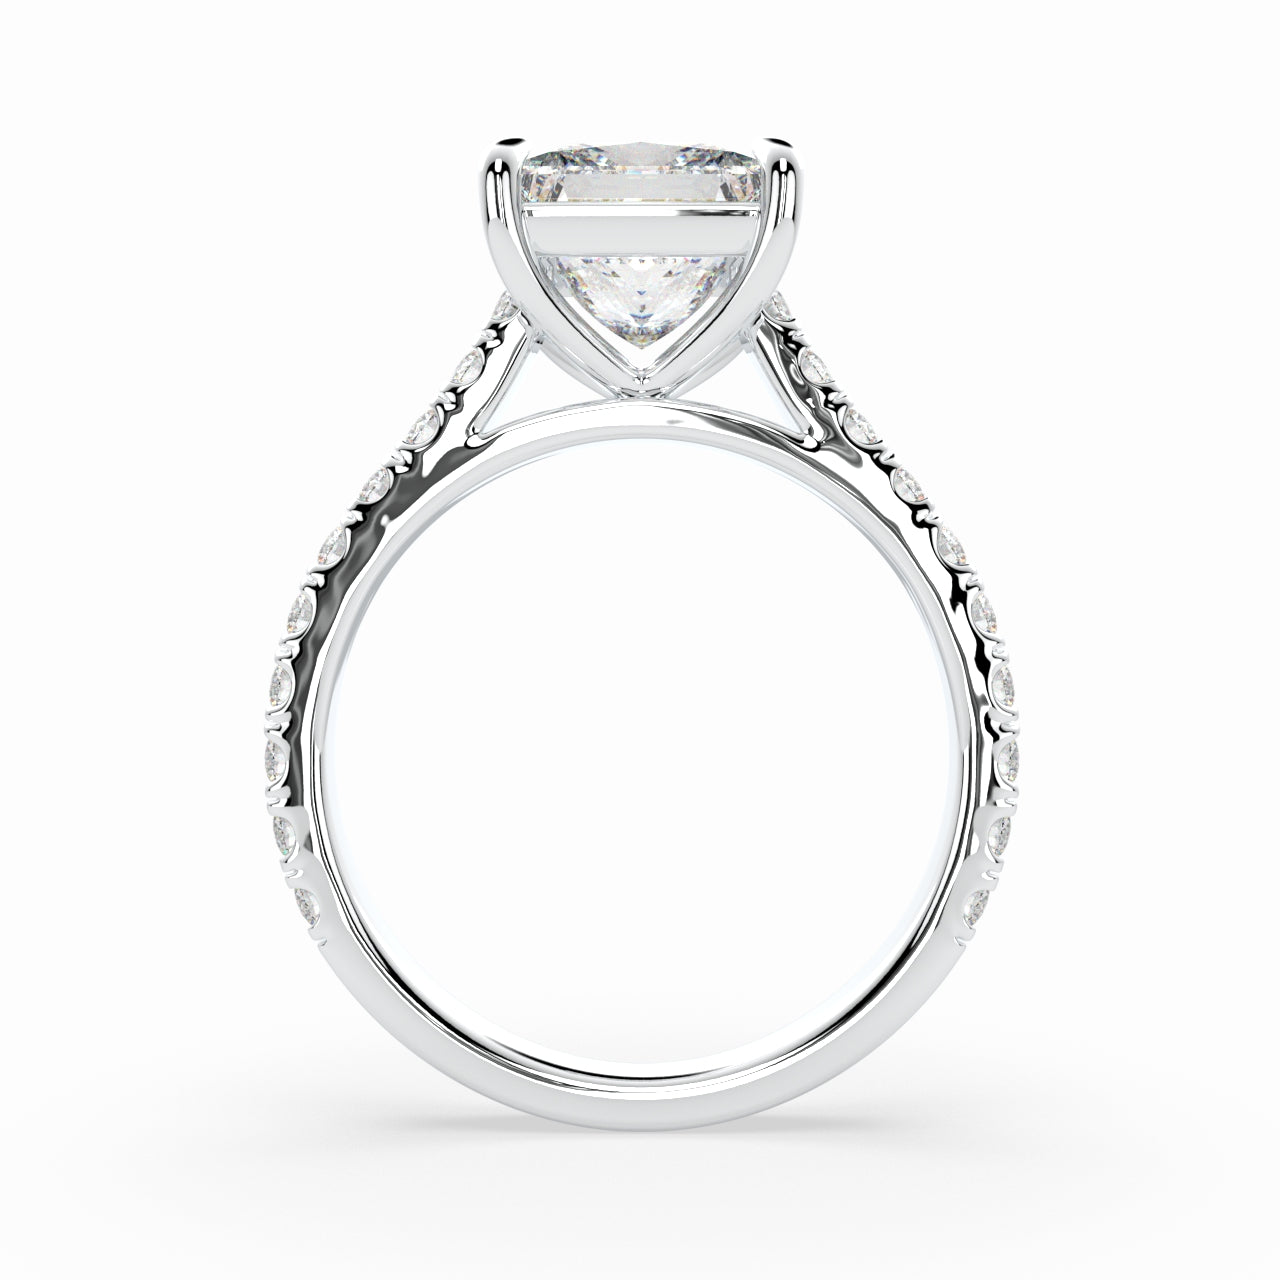 Princess Solitaire Cathedral Engagement Ring with diamonds on band LR022W